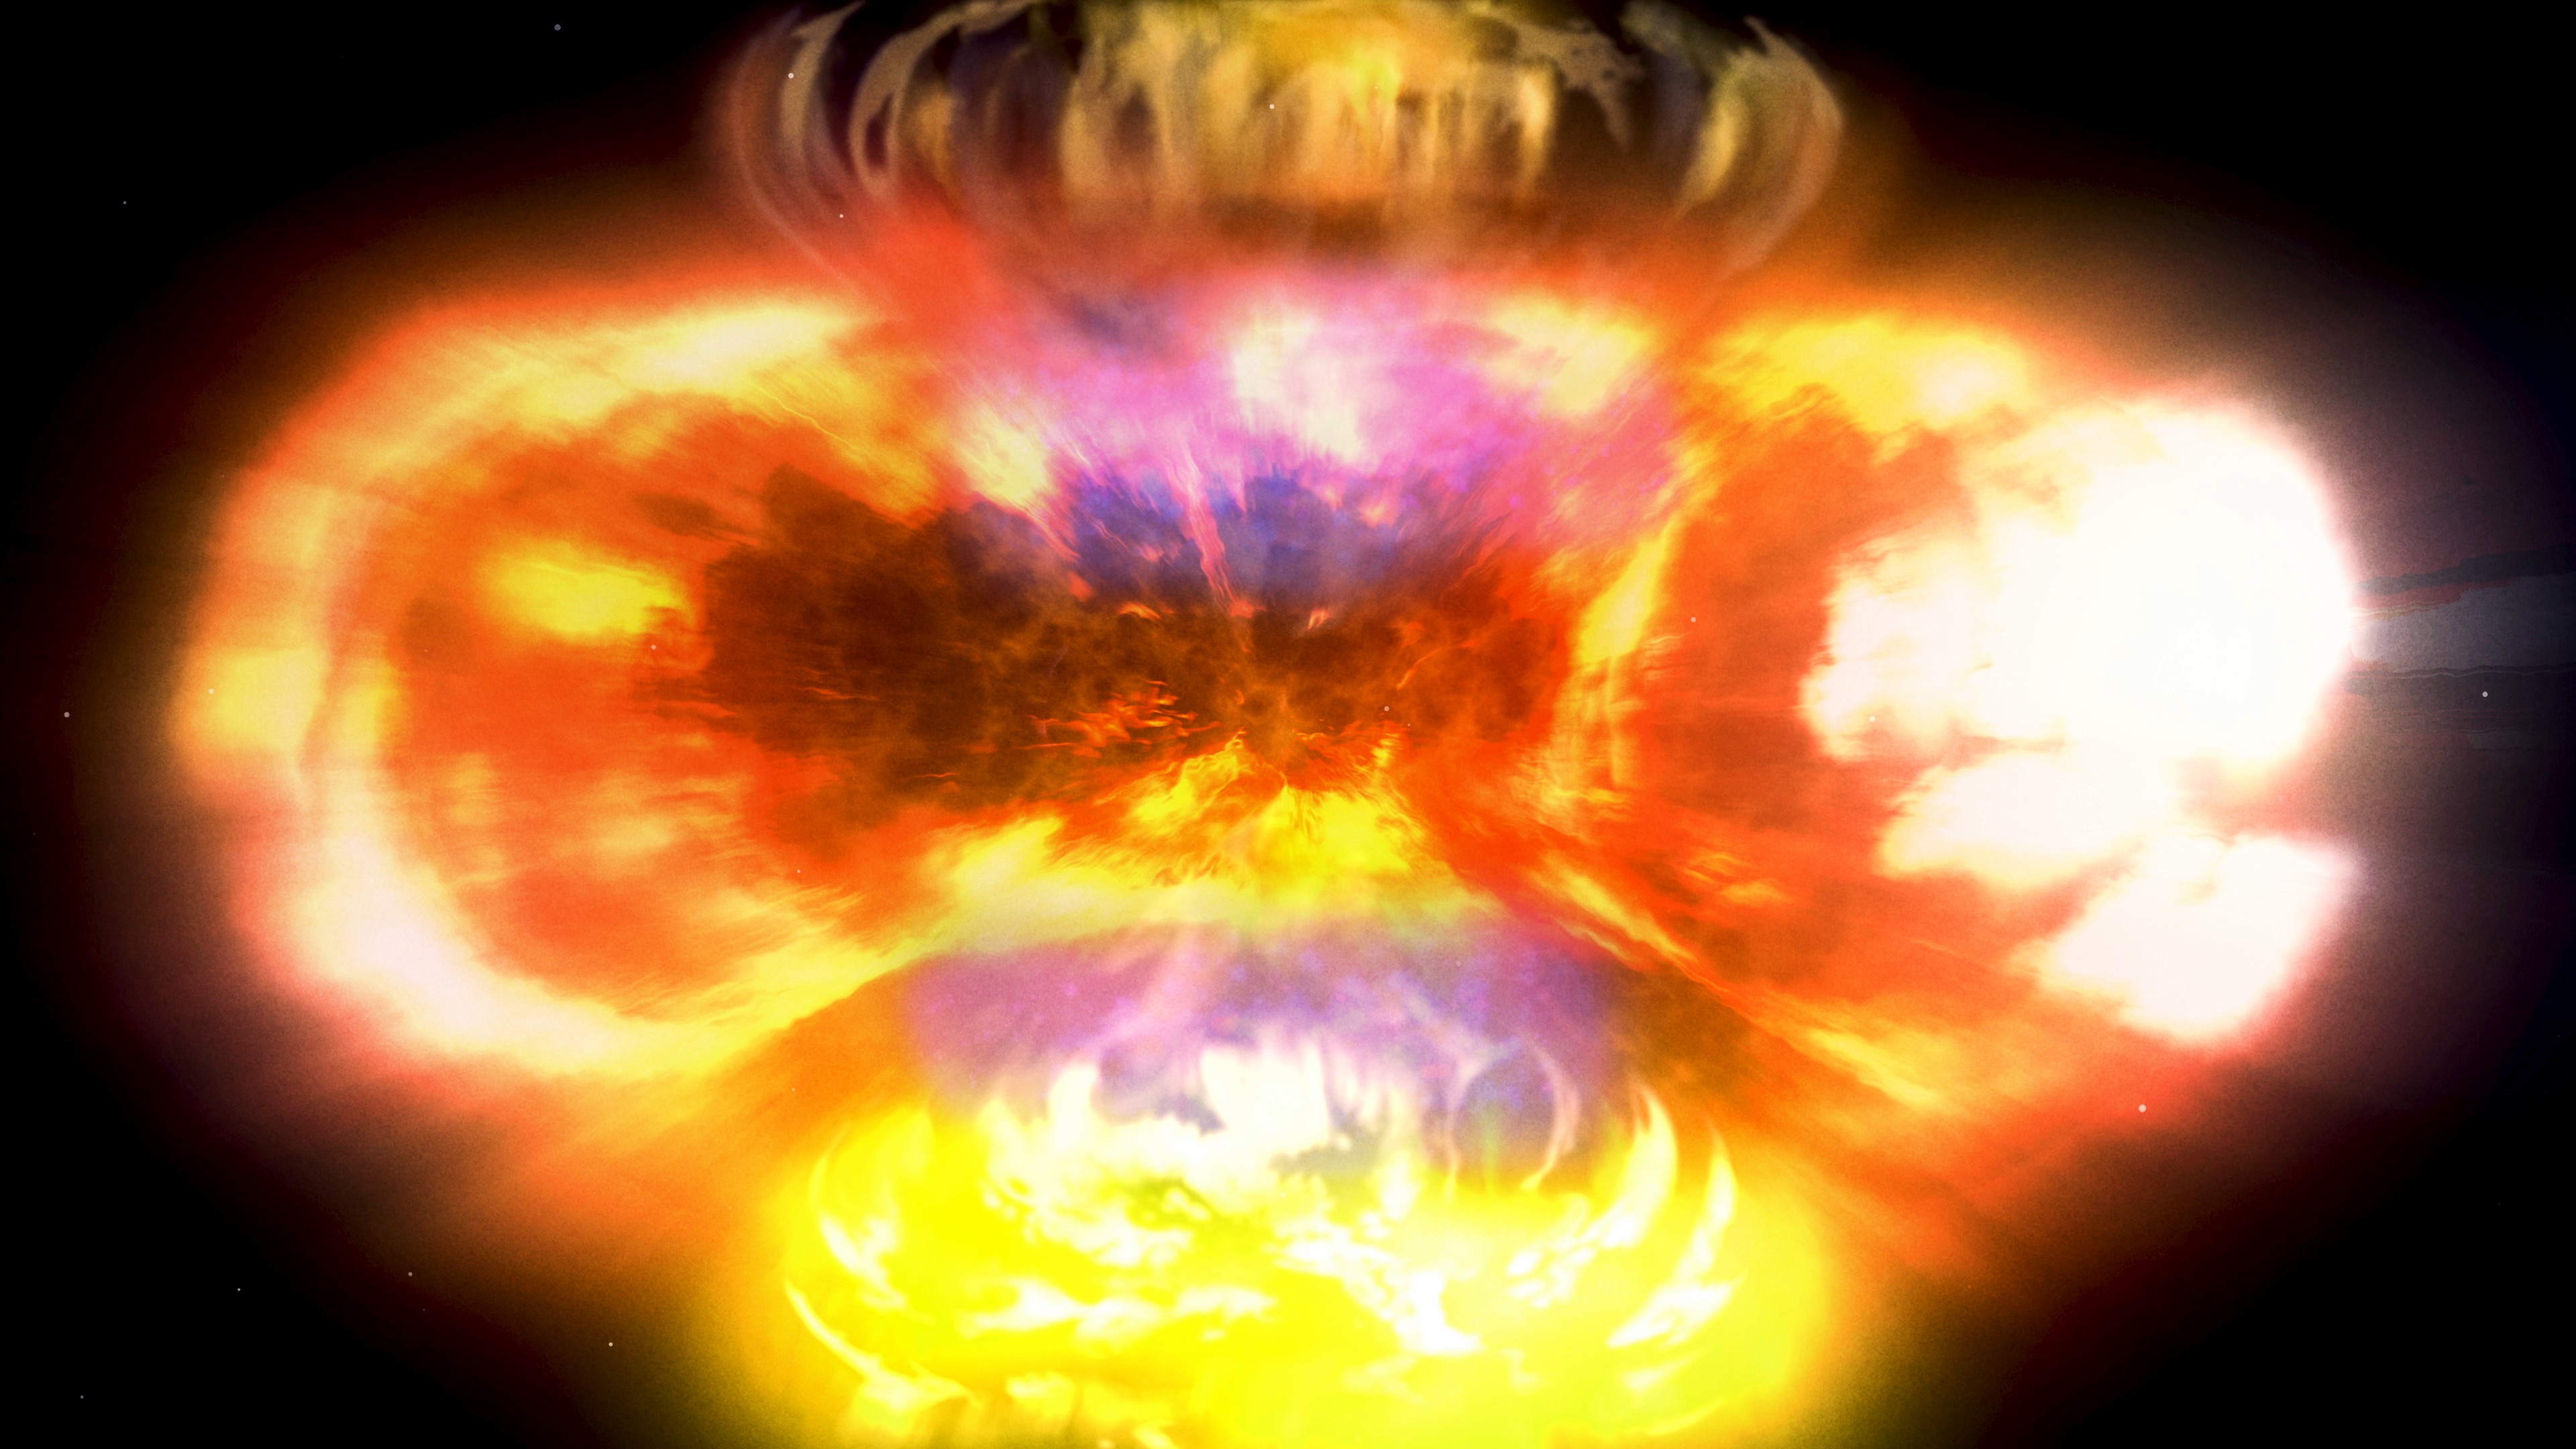 NASA’s Fermi and NuSTAR space telescopes, together with another satellite named BRITE-Toronto, are providing new insights into a nova explosion that erupted in 2018. Detailed measurements of bright flares in the explosion clearly show that shock waves power most of the nova's visible light.  Credit: NASA’s Goddard Space Flight CenterMusic: "Scientist" from Universal Production MusicWatch this video on the NASA Goddard YouTube channel.Complete transcript available.